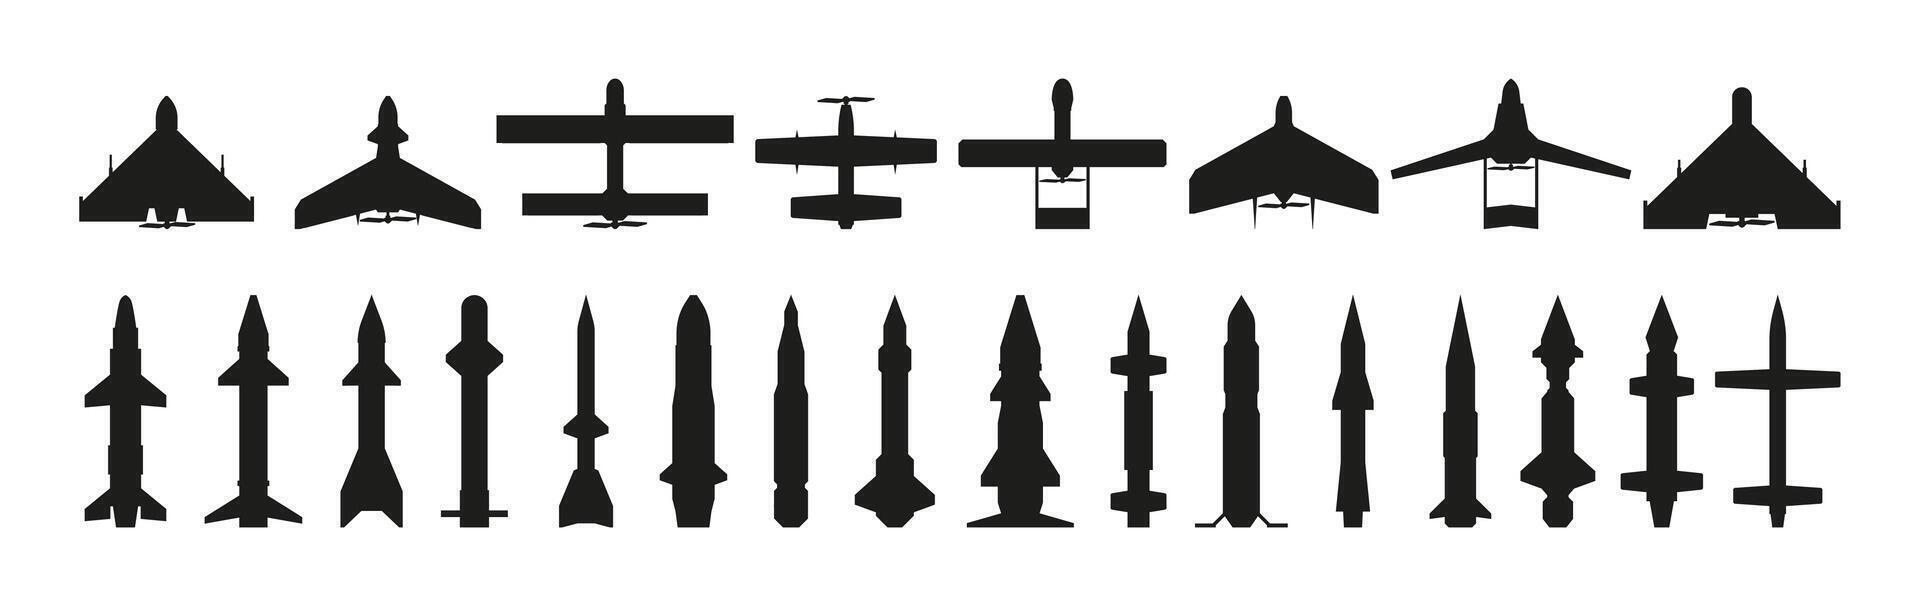 Missiles silhouette. Military guided aircraft weapon with warheads, black army munition, flying explosive missilery flat style. Vector isolated collection